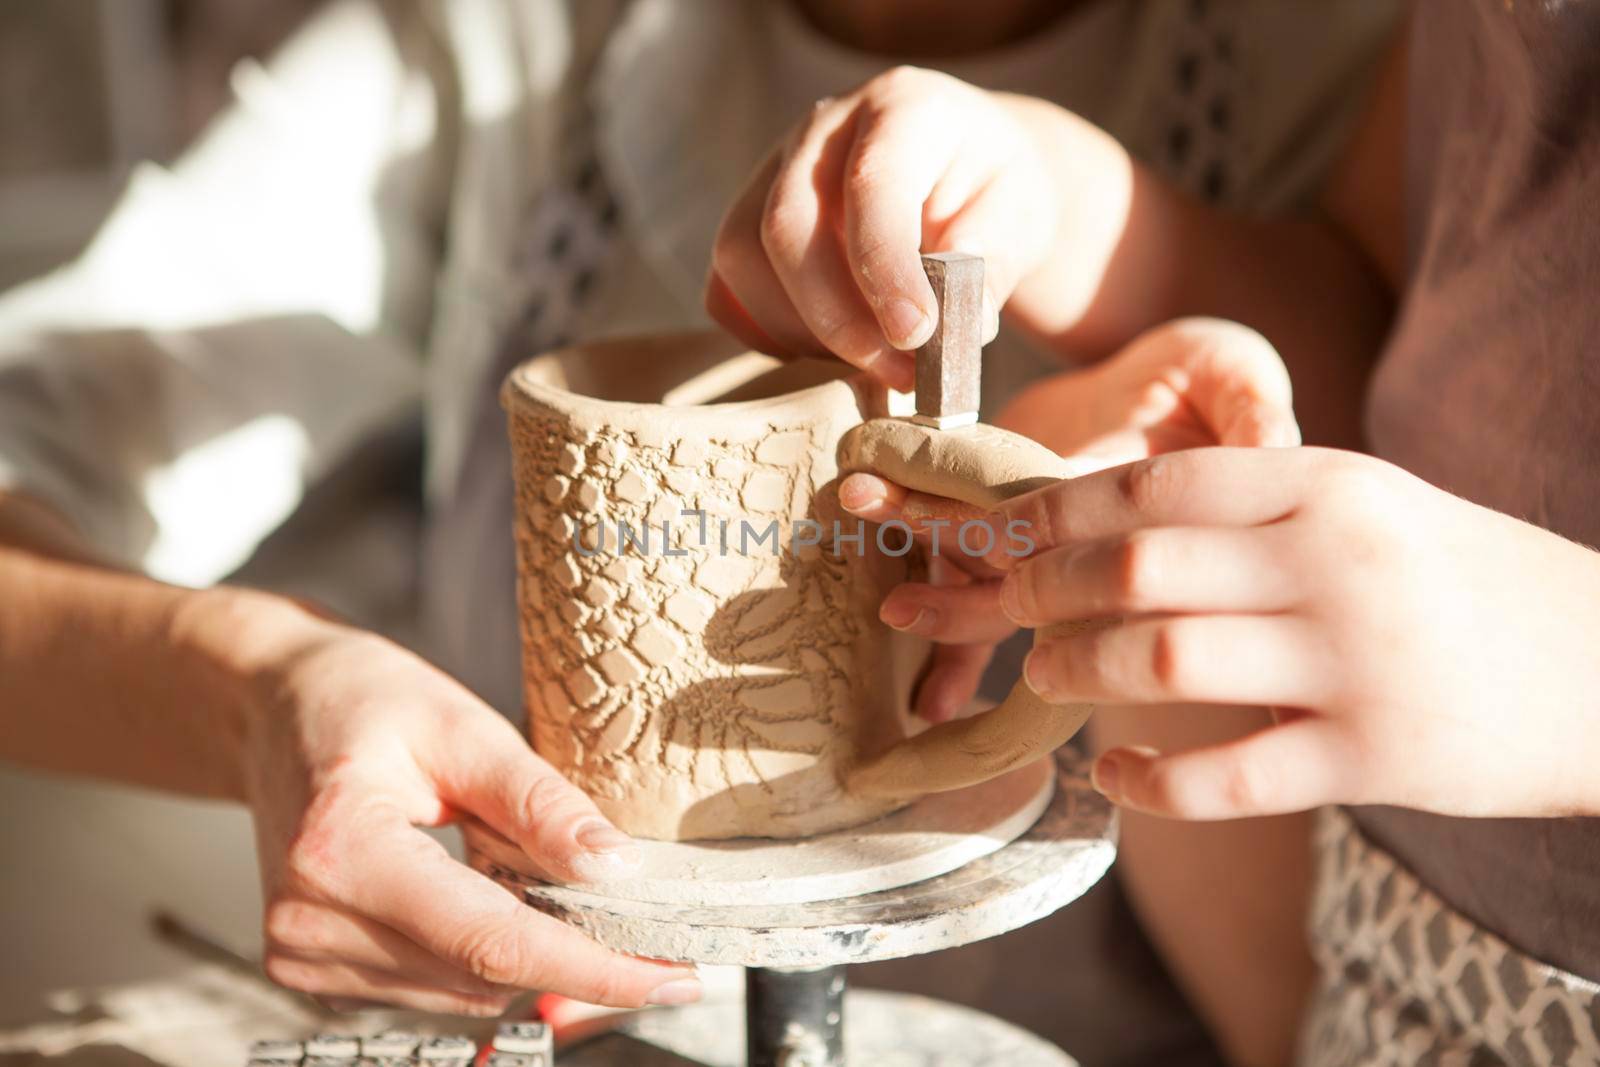 Mother and Son Making Pottery together by MAD_Production